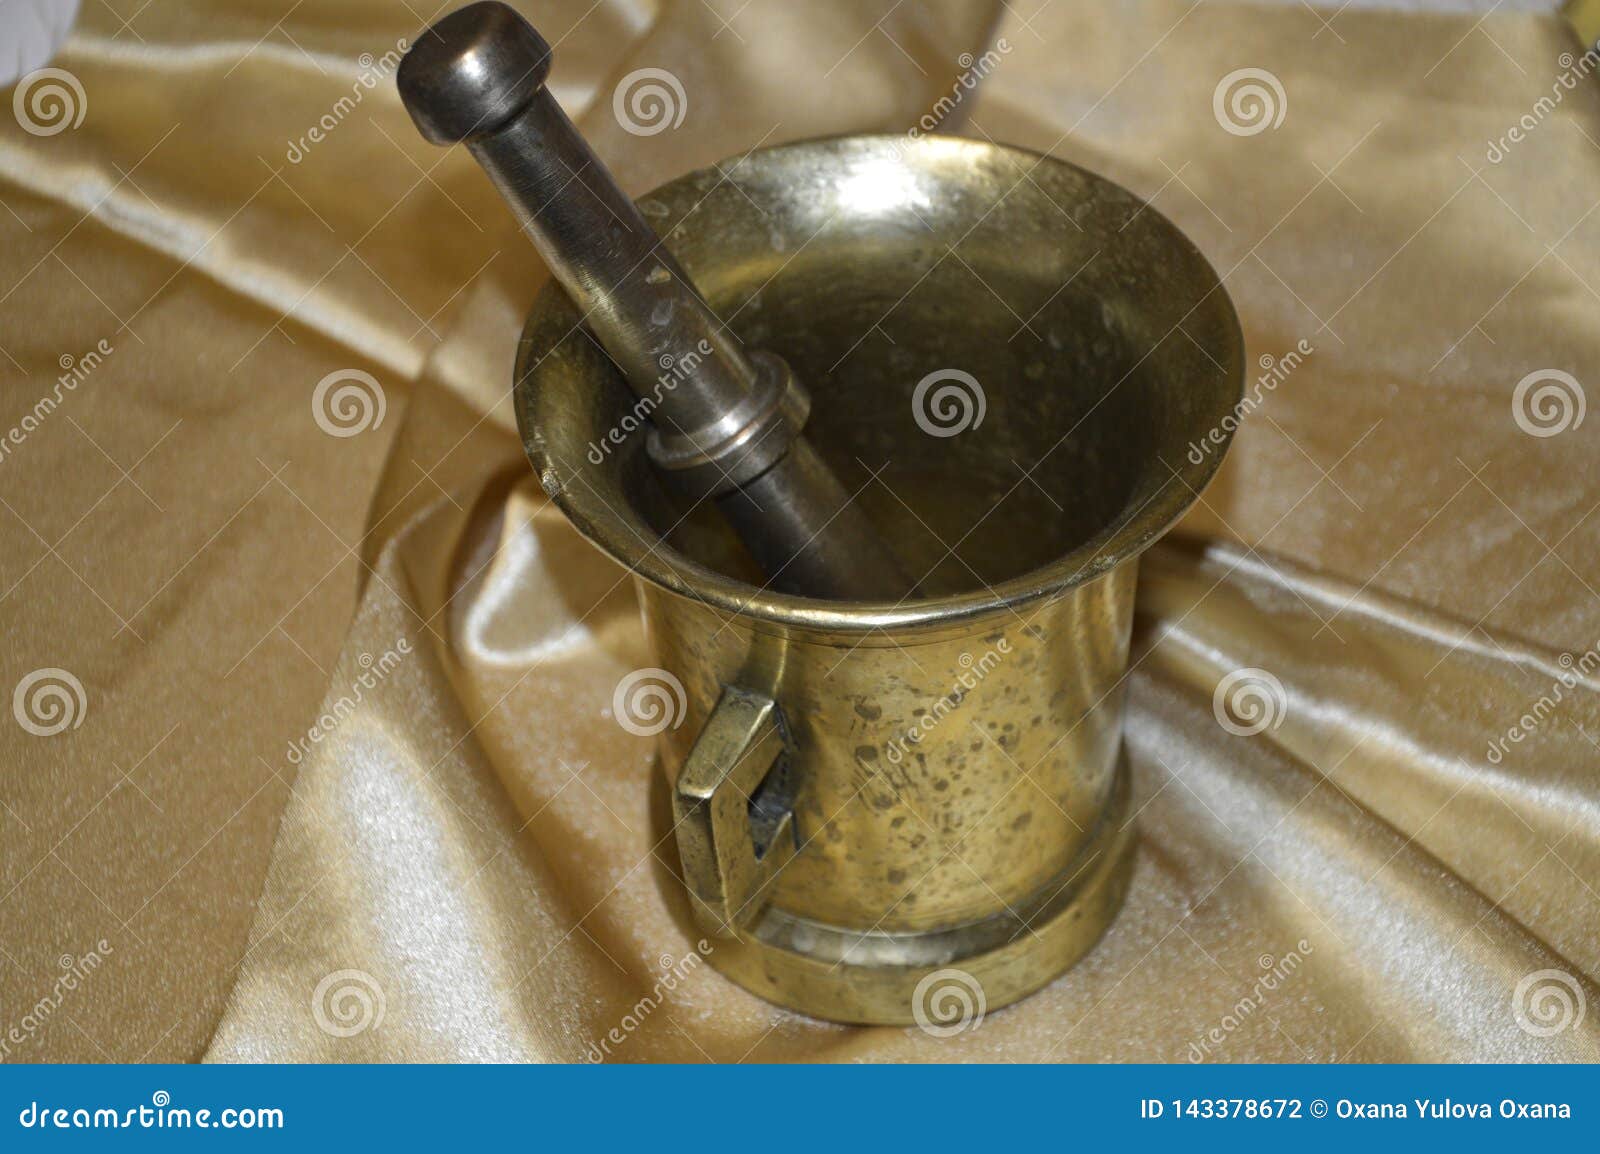 Ancient mortar with pestle stock photo. Image of white - 143378672